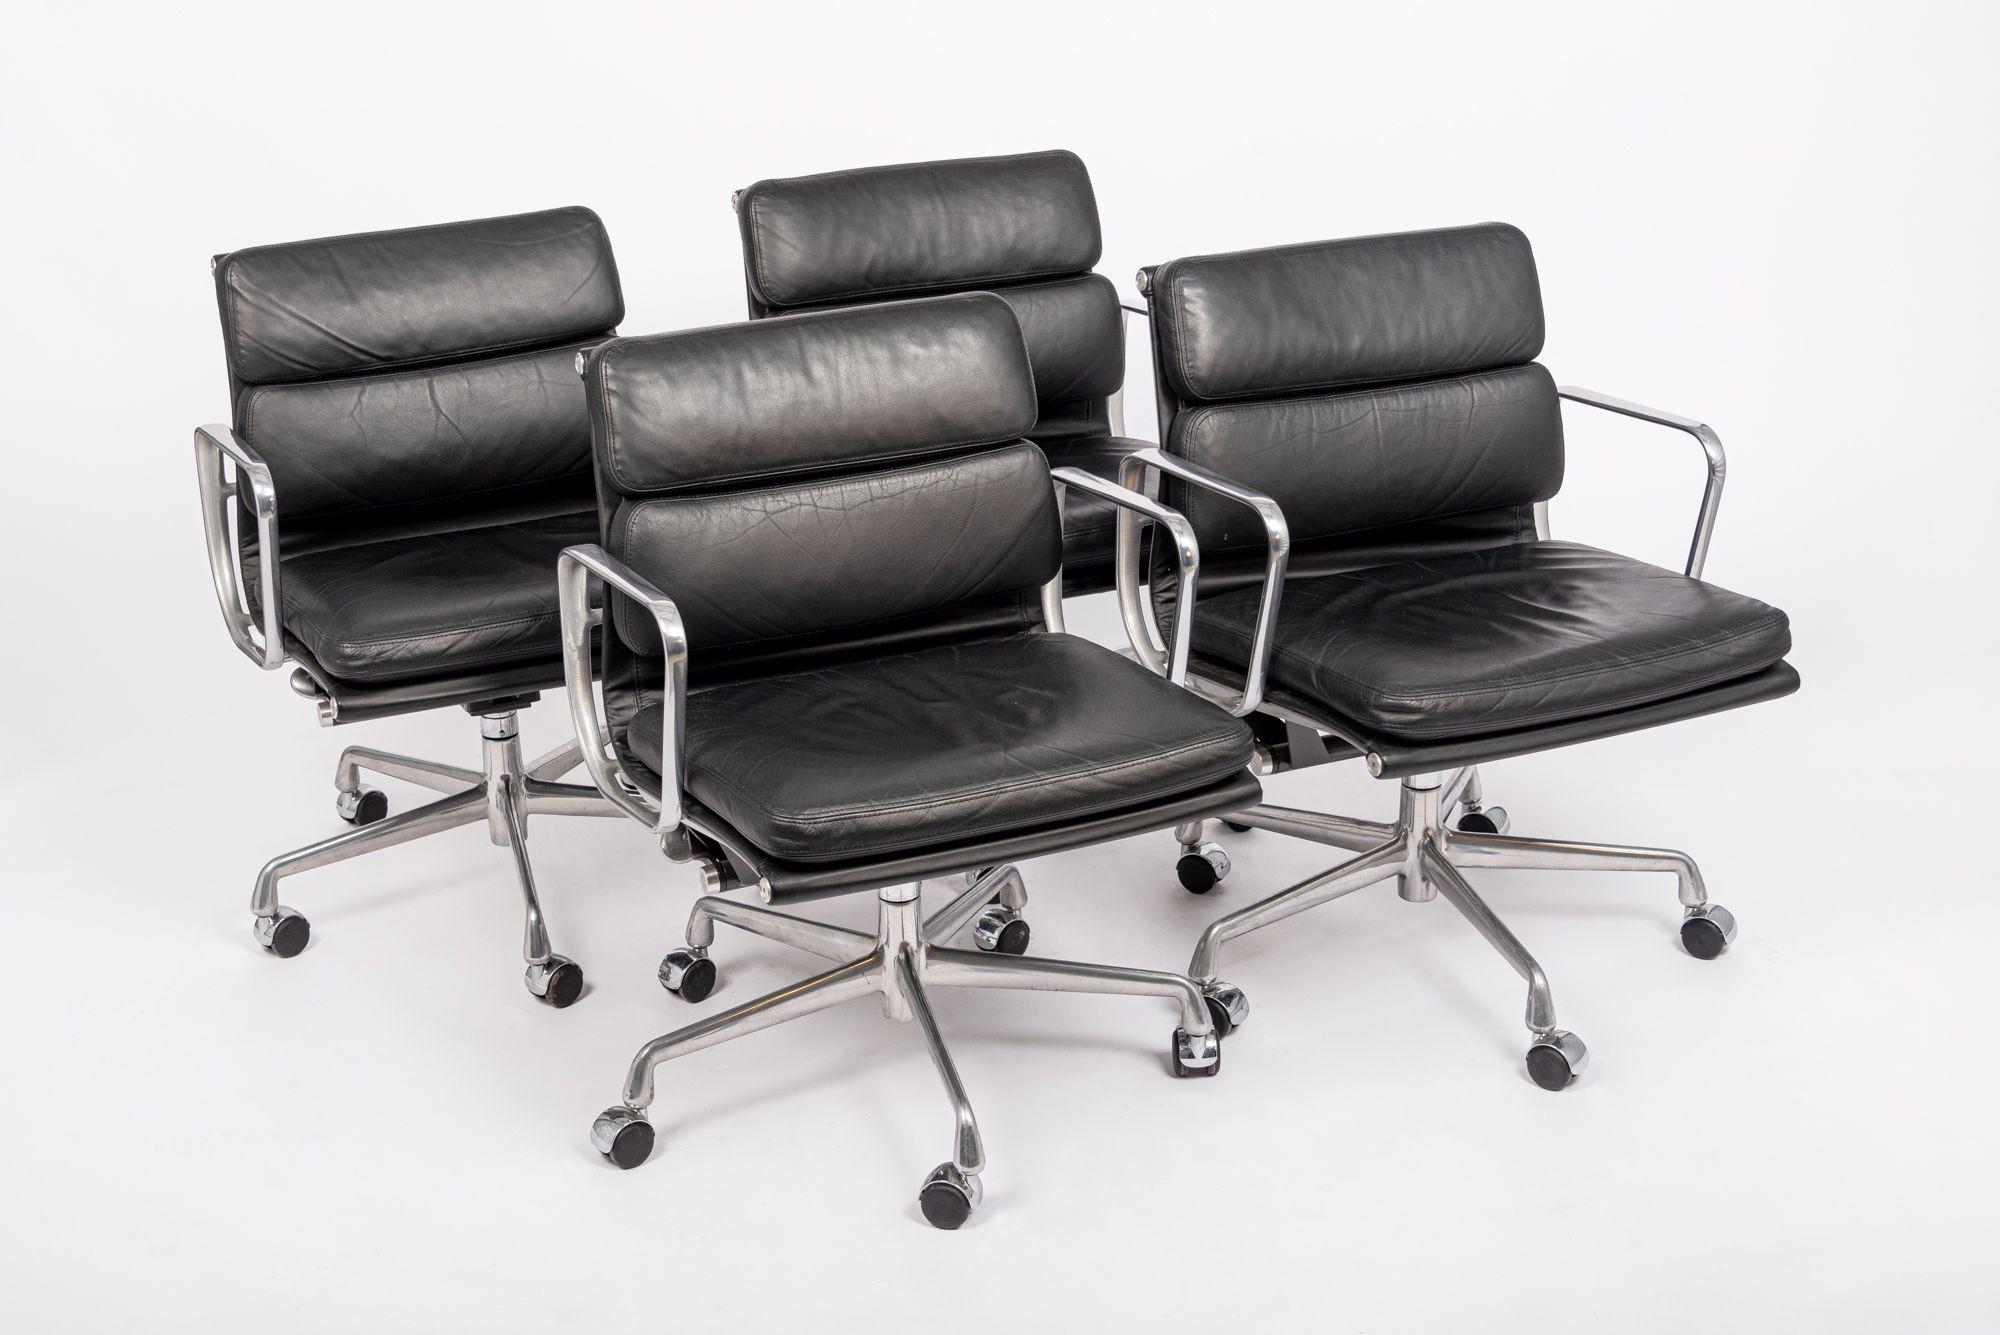 These authentic Eames for Herman Miller Soft Pad Management Height black leather office chairs from the Aluminum Group Collection were manufactured in the 2001. This classic mid century modern office chair was first introduced in 1969 by Charles and